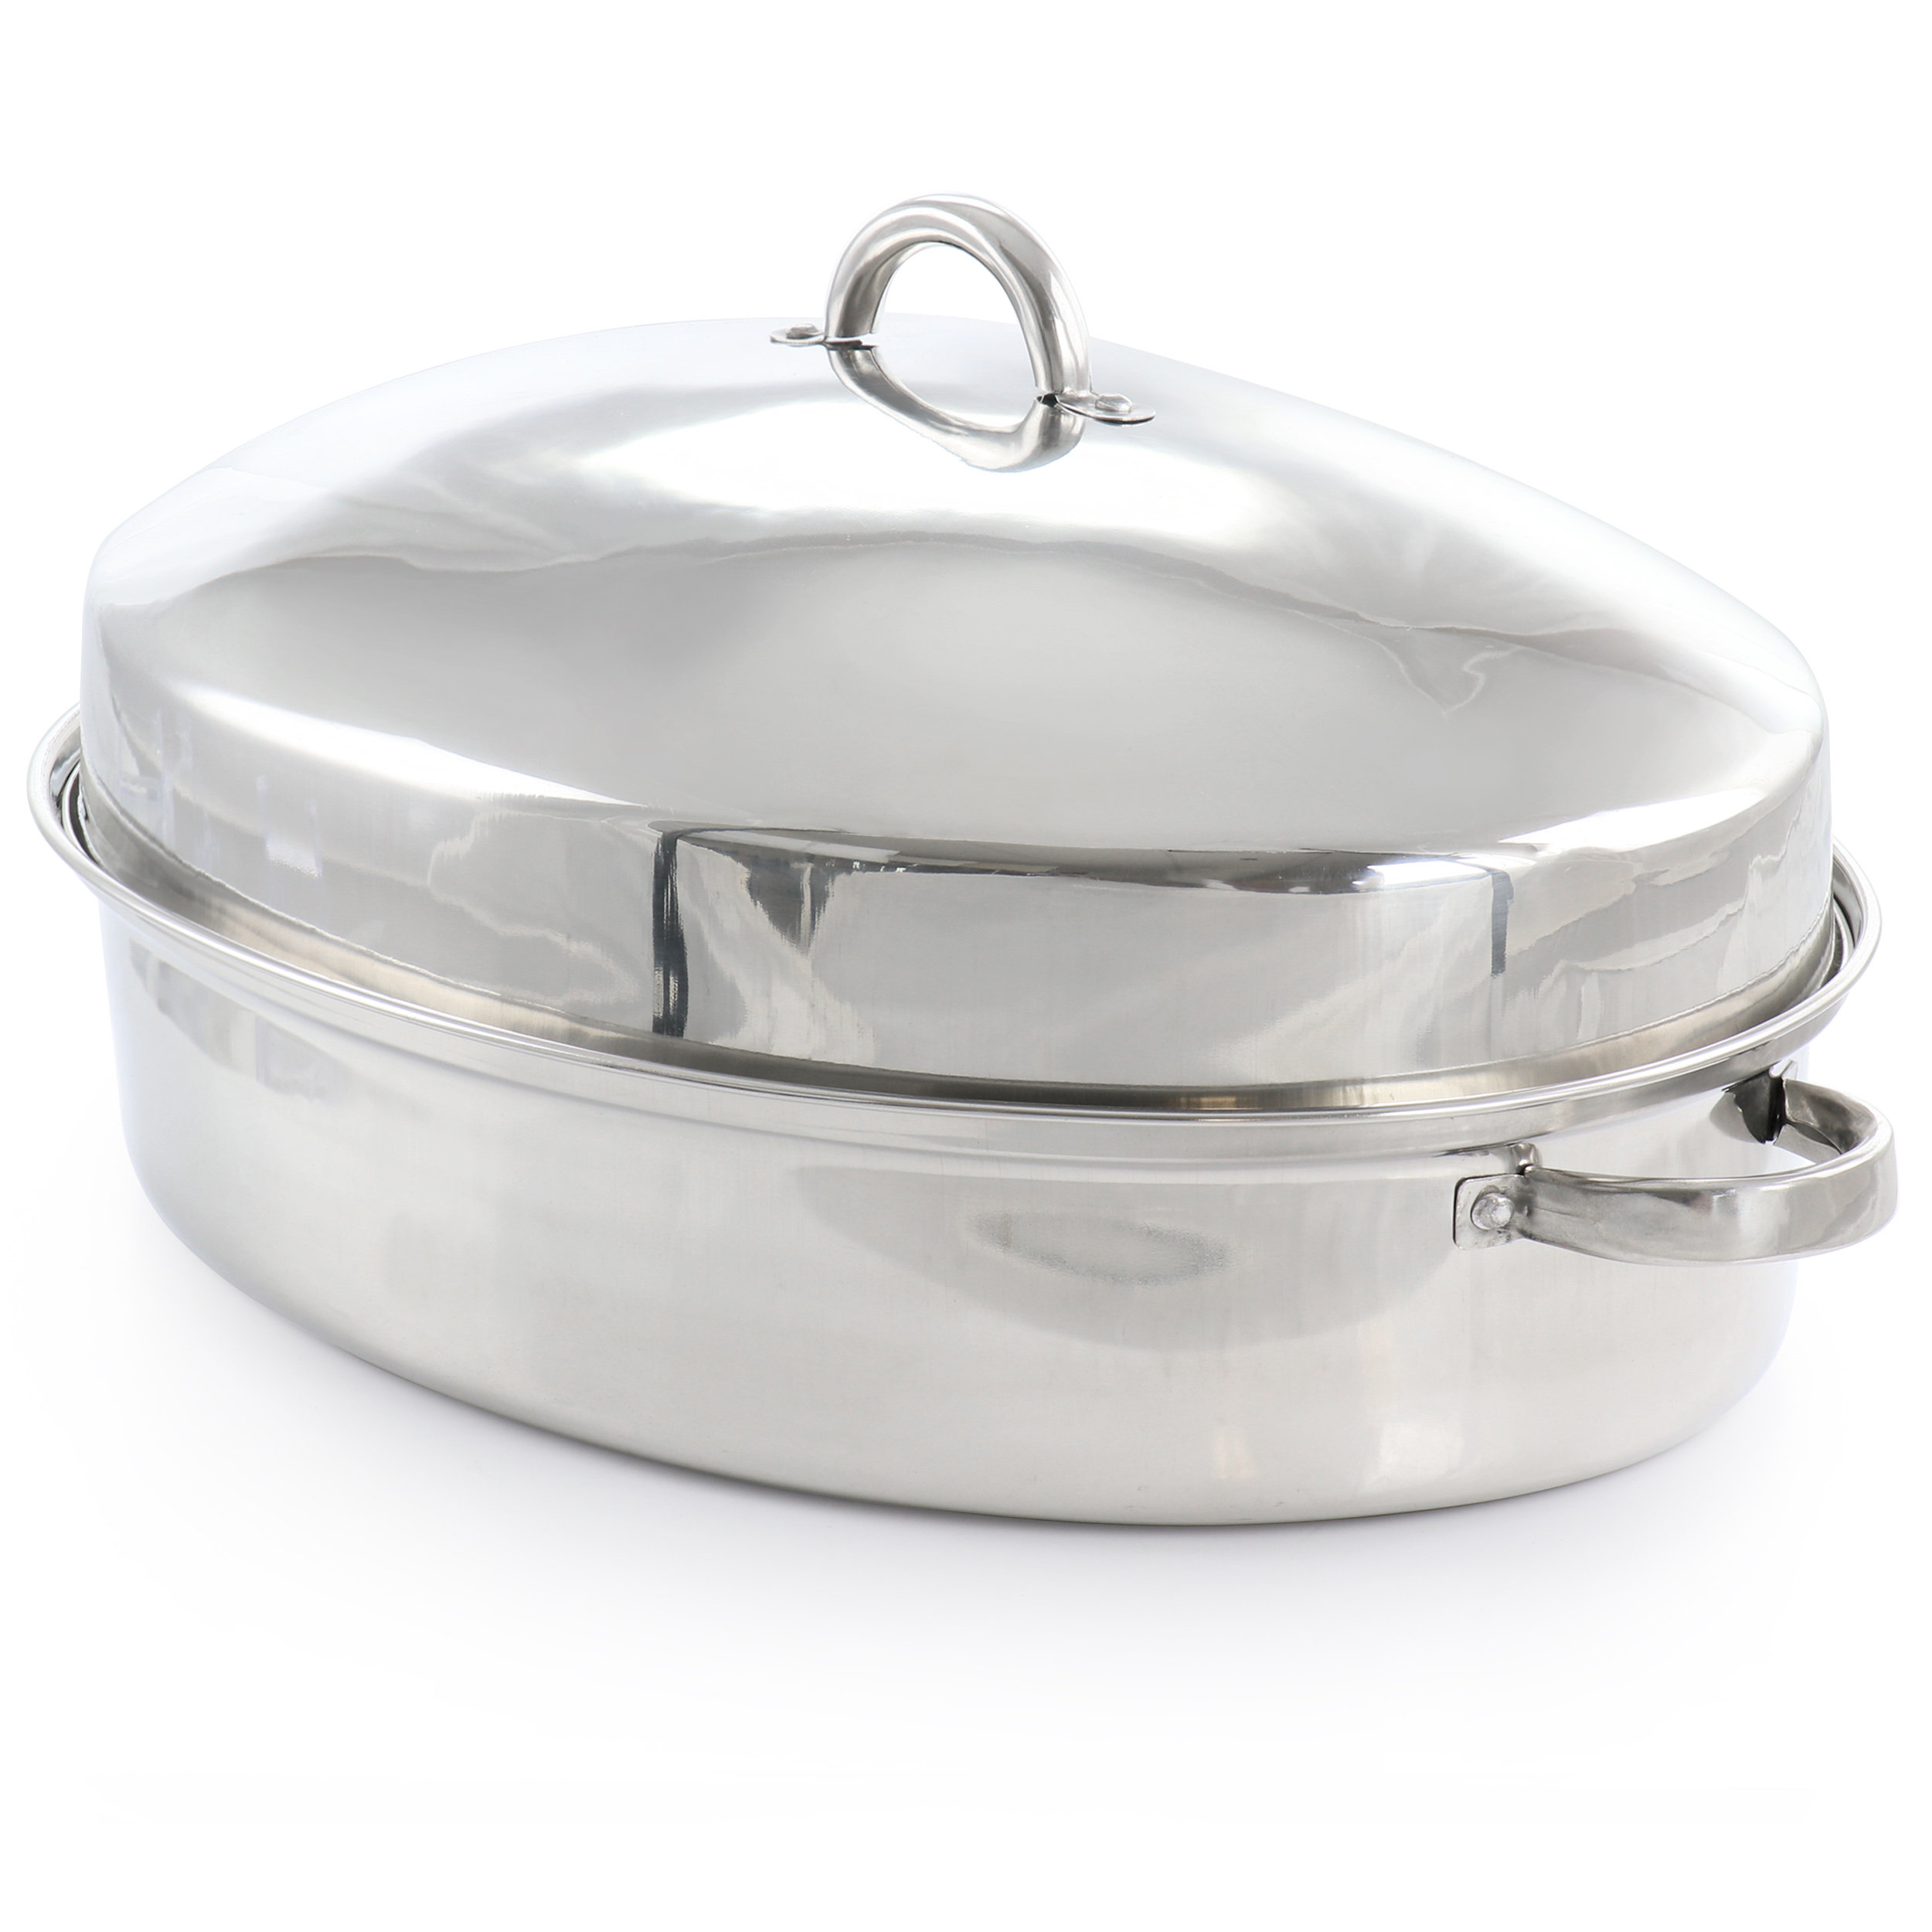 OVENTE 3-Piece 16 in. Silver Stainless Steel Oval Roasting Pan